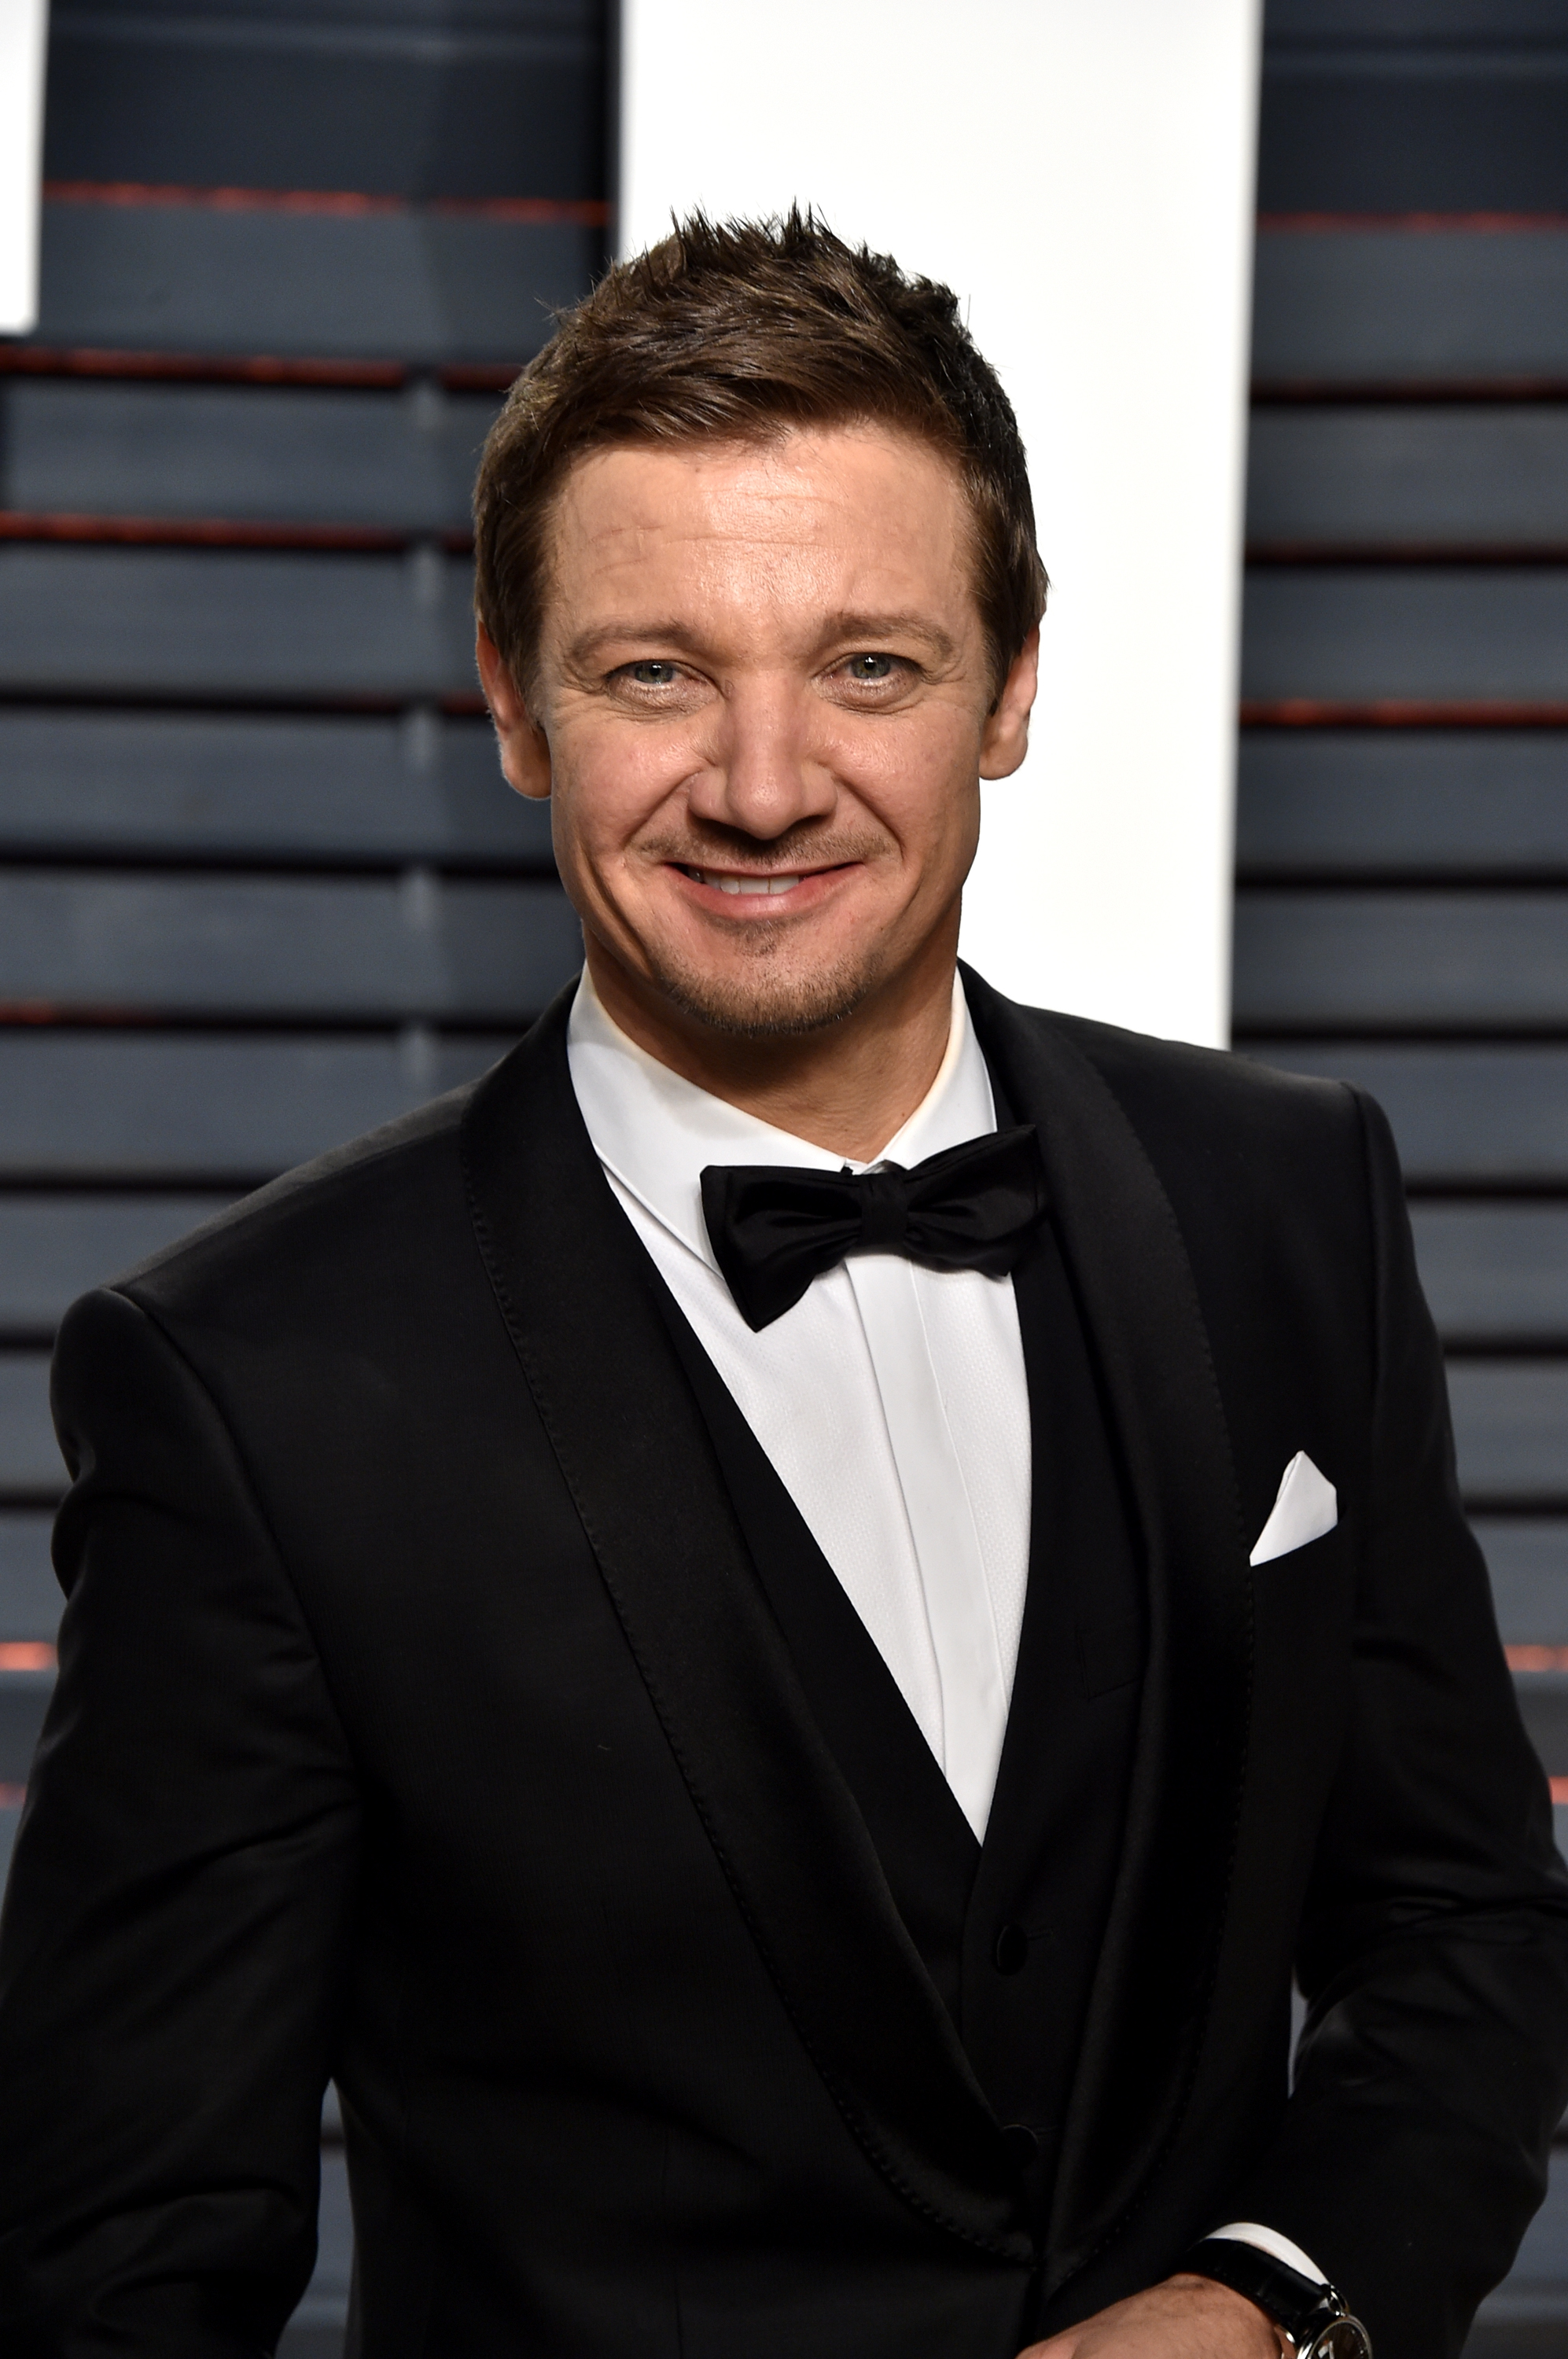 Jeremy Renner attends the 2017 Vanity Fair Oscar party on February 26, 2017 in Beverly Hills, California | Source: Getty Images